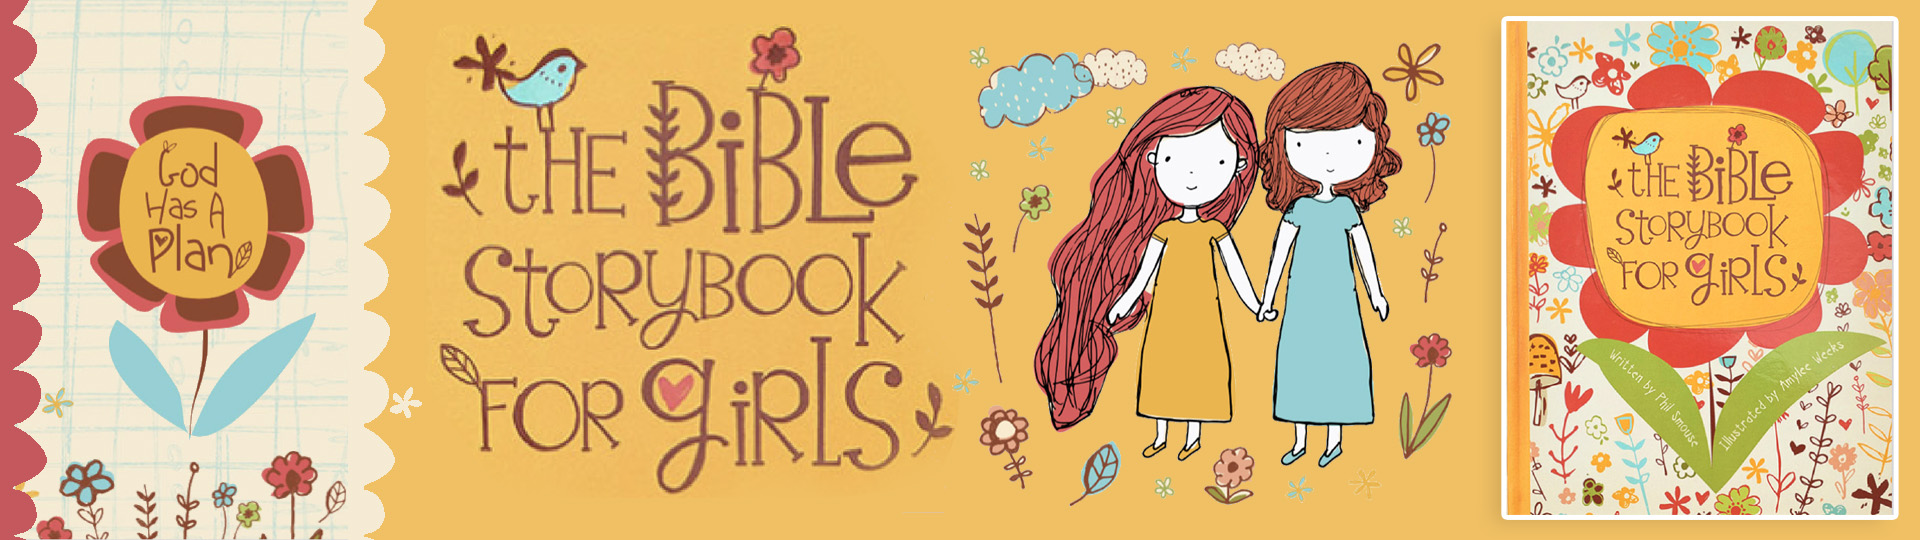 The Bible Storybook for Girls - Phil A. Smouse and Amylee Weeks